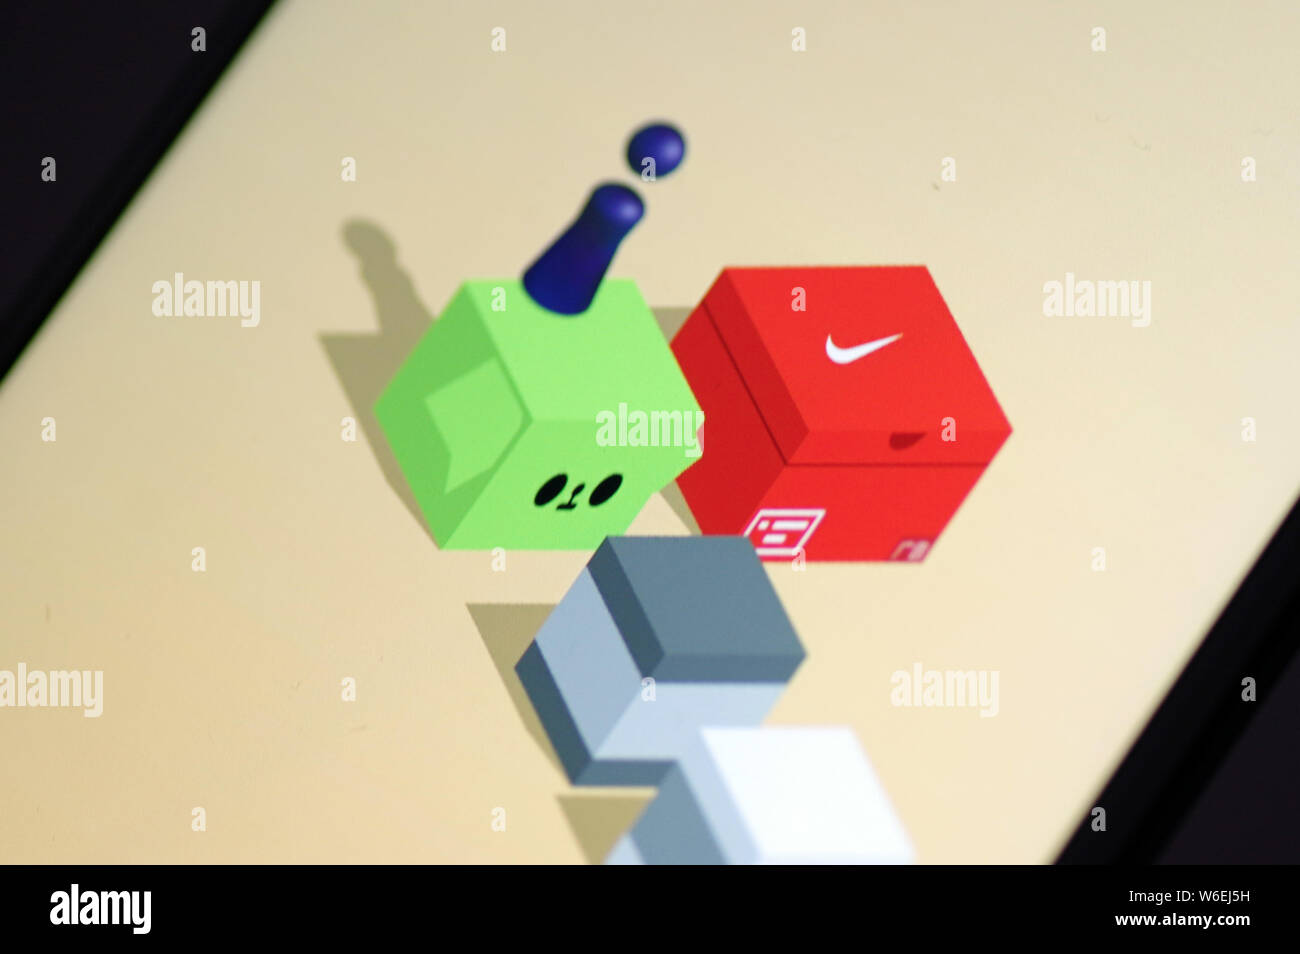 Viral jumping game on China's WeChat draws big money from Nike